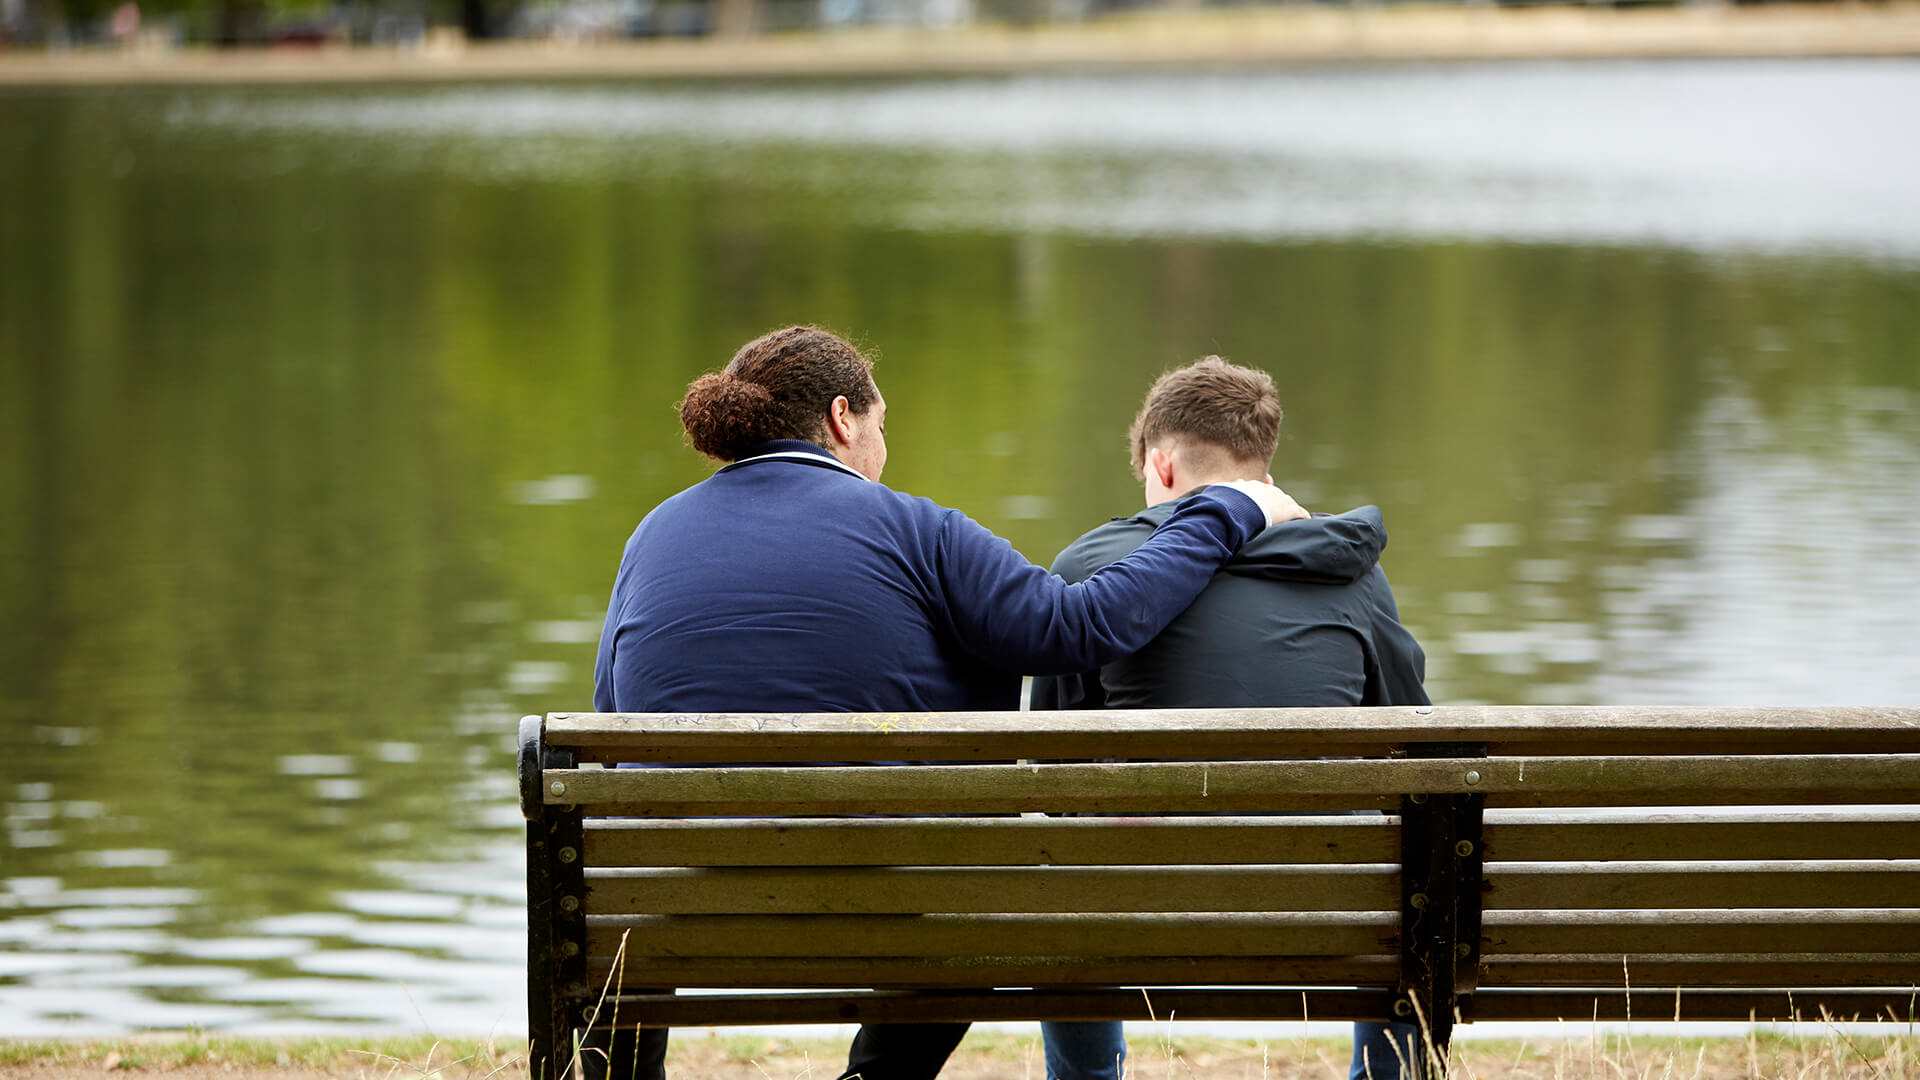 Two young men sit on a park bench overlooking a lake. One has his arm on the other's shoulder to comfort him.